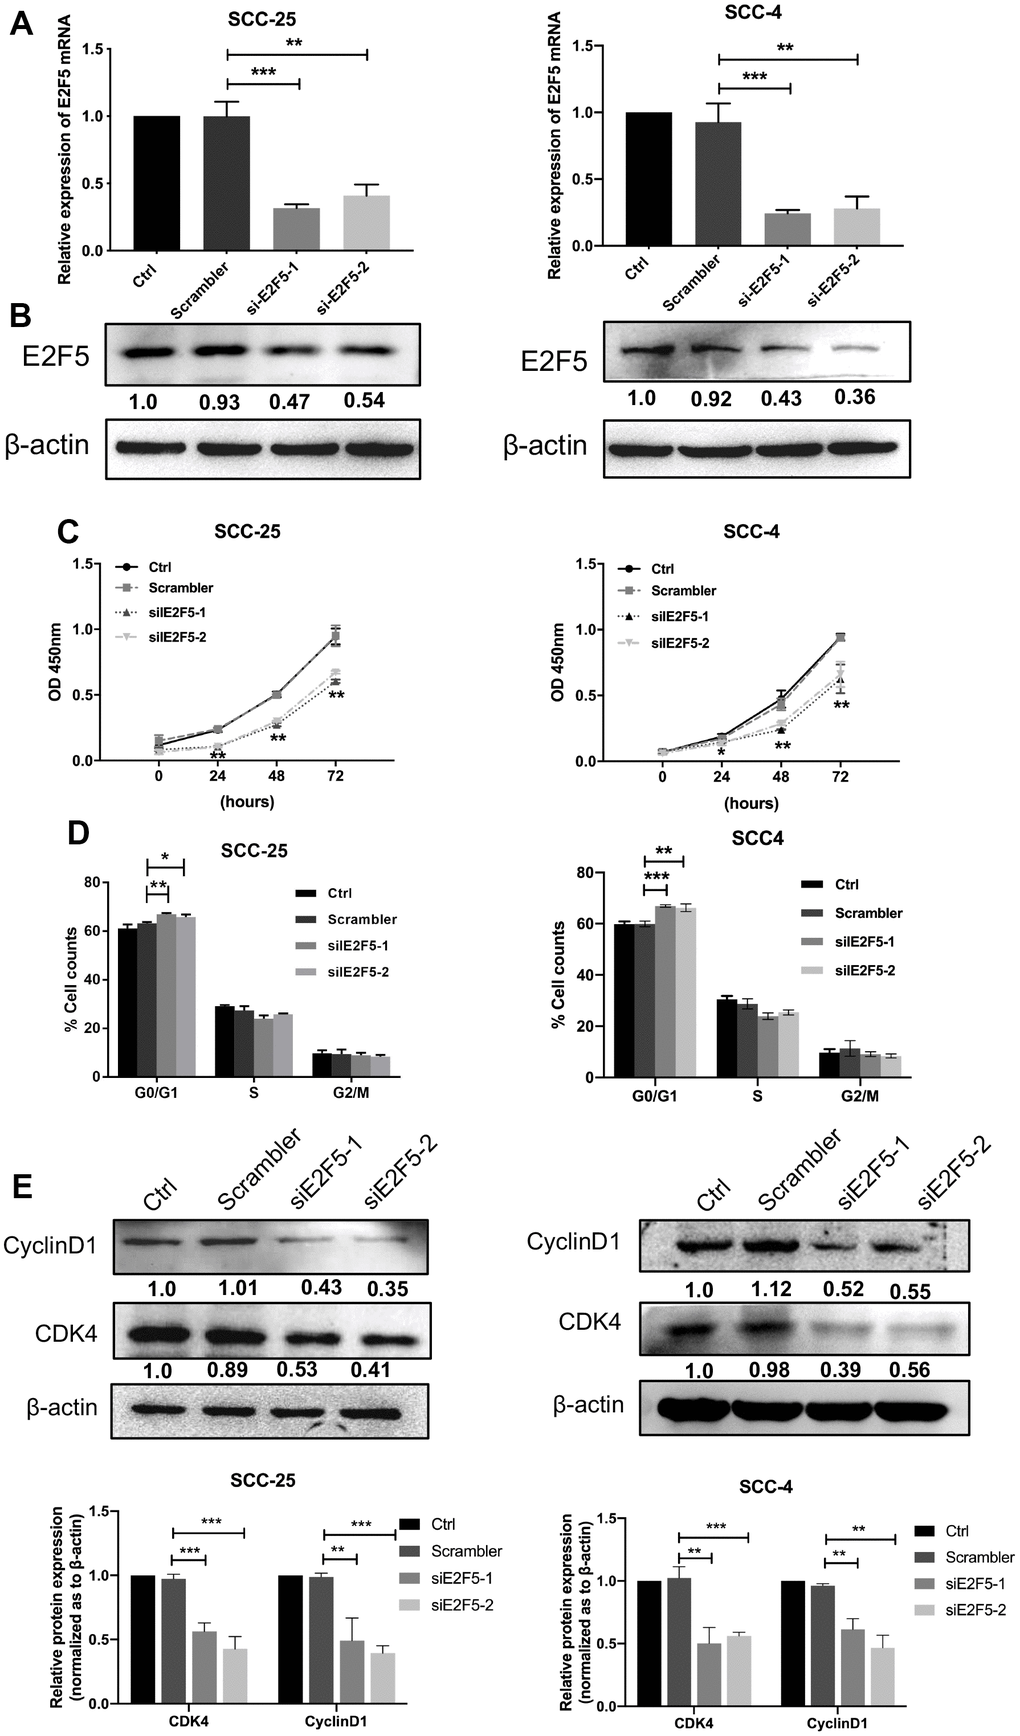 Effects of E2F5 inhibition on OSCC cell growth. The expression of E2F5 was analyzed with qRT-PCR (A) and Western blot (B) after transfection with siE2F5 and its control. (C) Cell viability of SCC-25 and SCC-4 cells transfected with siE2F5 was determined by the CCK8 assay (n=5). (D) Effects of suppression of E2F5 on the cell cycle progression of OSCC cells measured by flow cytometric analysis. (E) Expression analysis for cell cycles regulators Cyclin D1 and CDK4 was performed by Western blot. Relative expression levels were calculated using the image J software (n = 3). P ≤ 0.05 was considered to be statistically significant, *P P P 